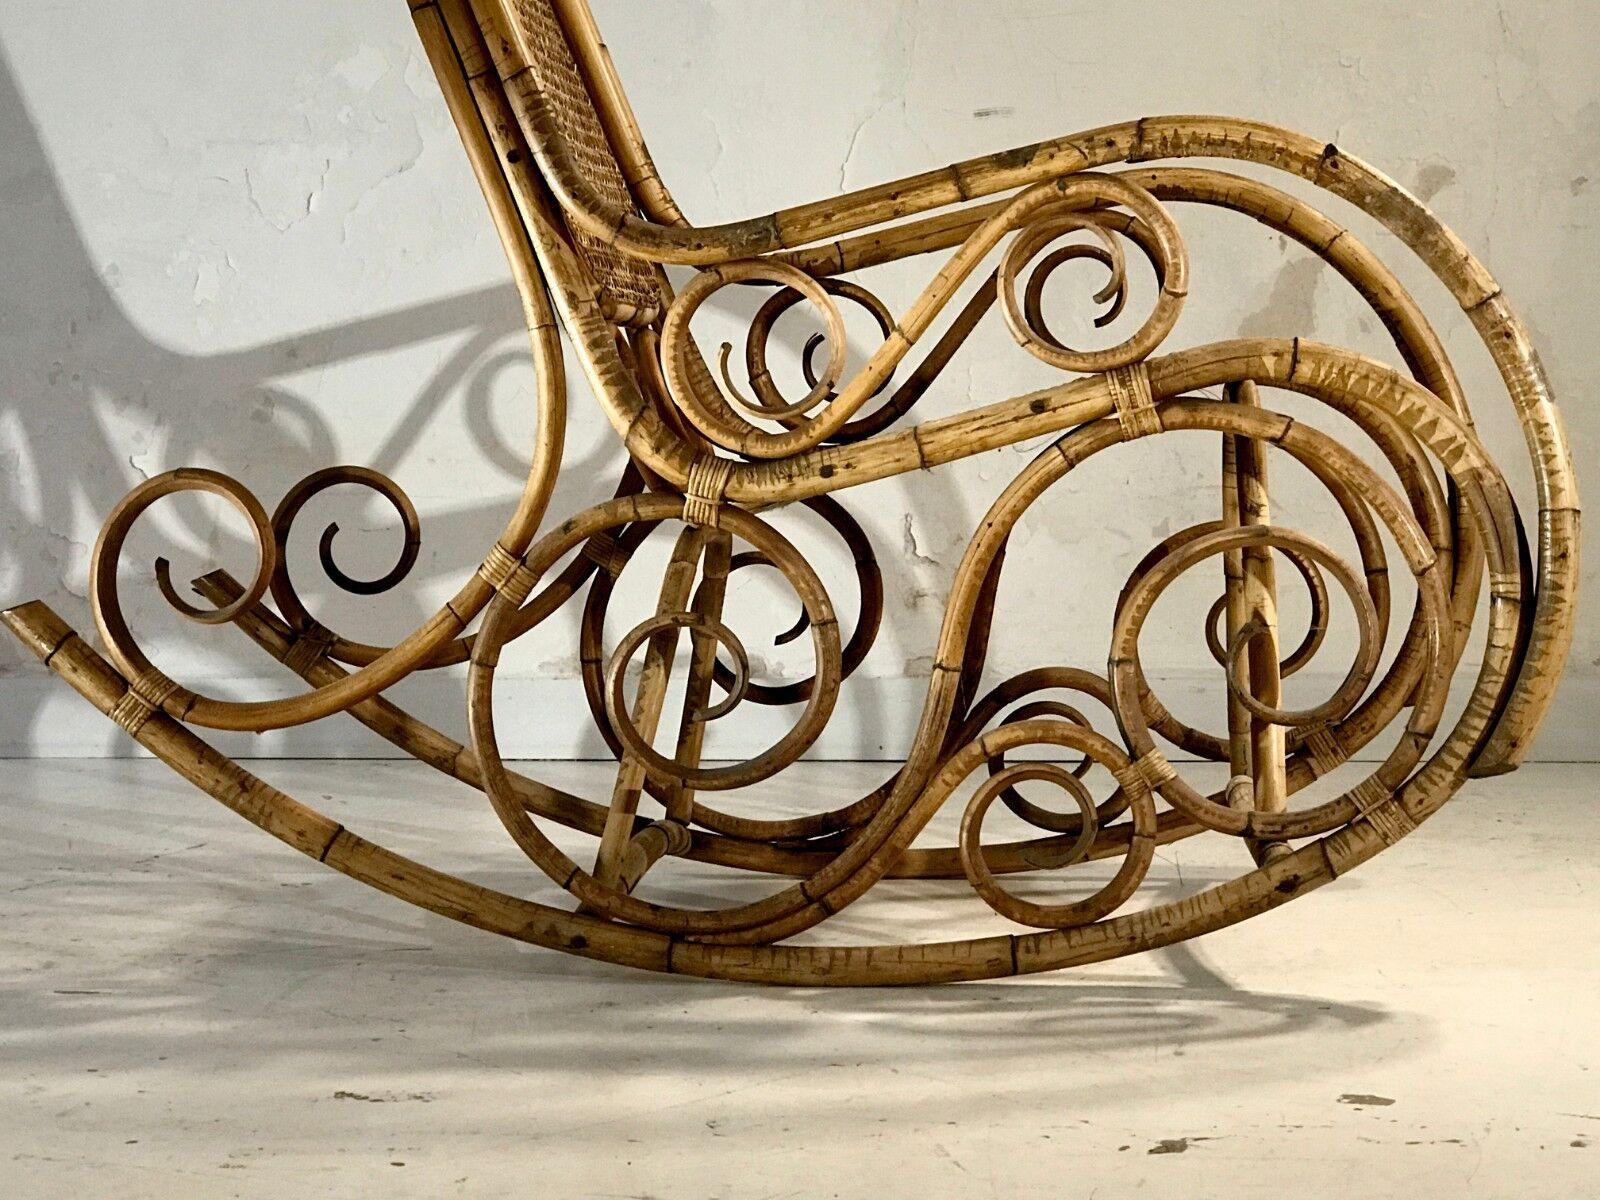 An Early MODERN NEO-CLASSICAL FREE-FORM ROCKING-CHAIR by THONET, France 1900 For Sale 5